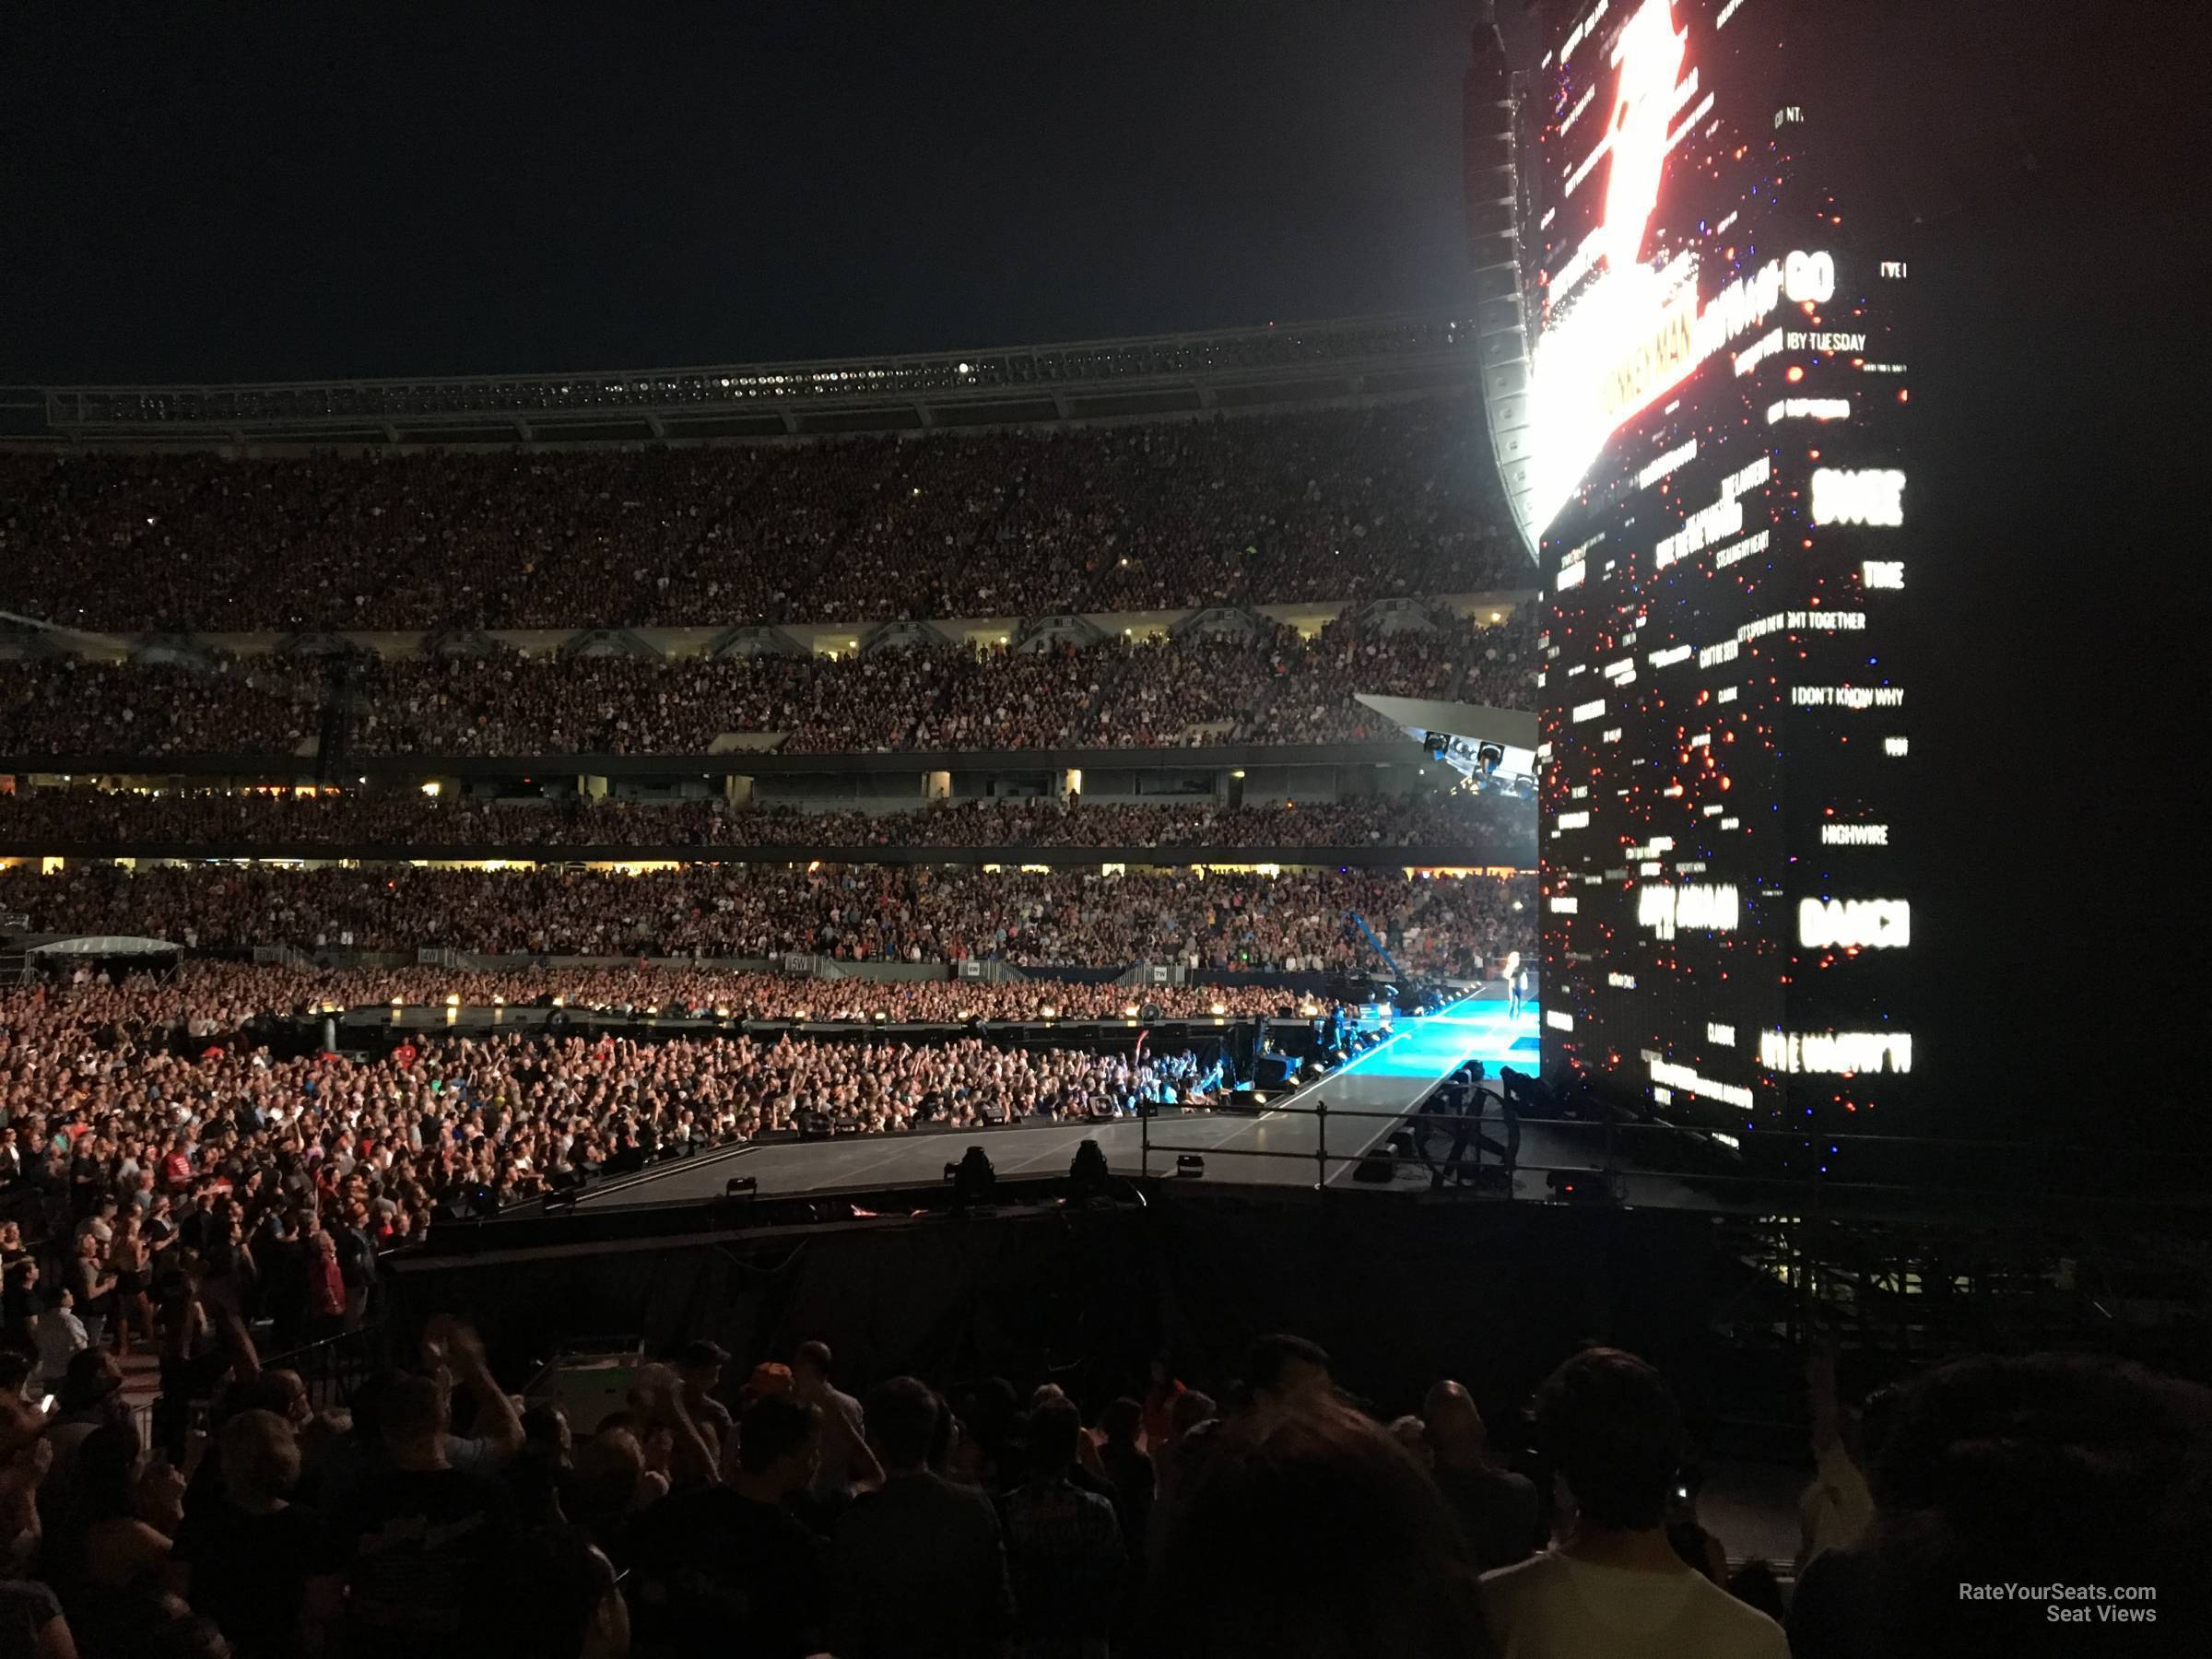 section 103, row 8 seat view  for concert - soldier field